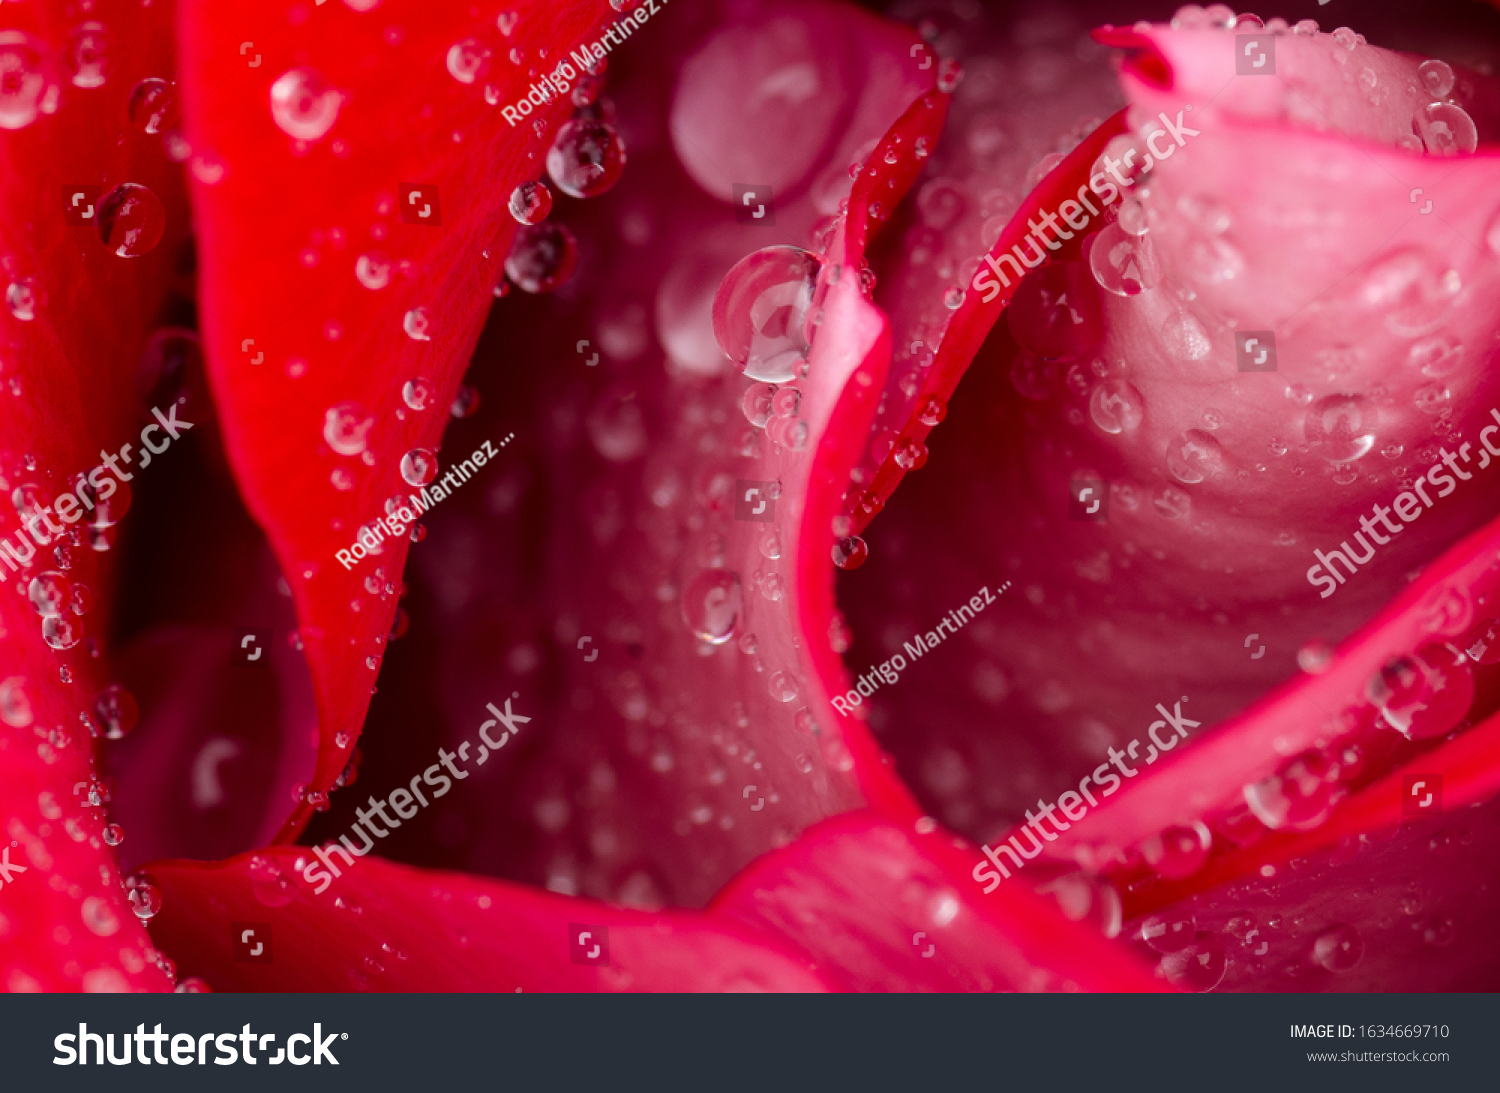 close up of red rose with water drop details, open petals and petal detail #1634669710